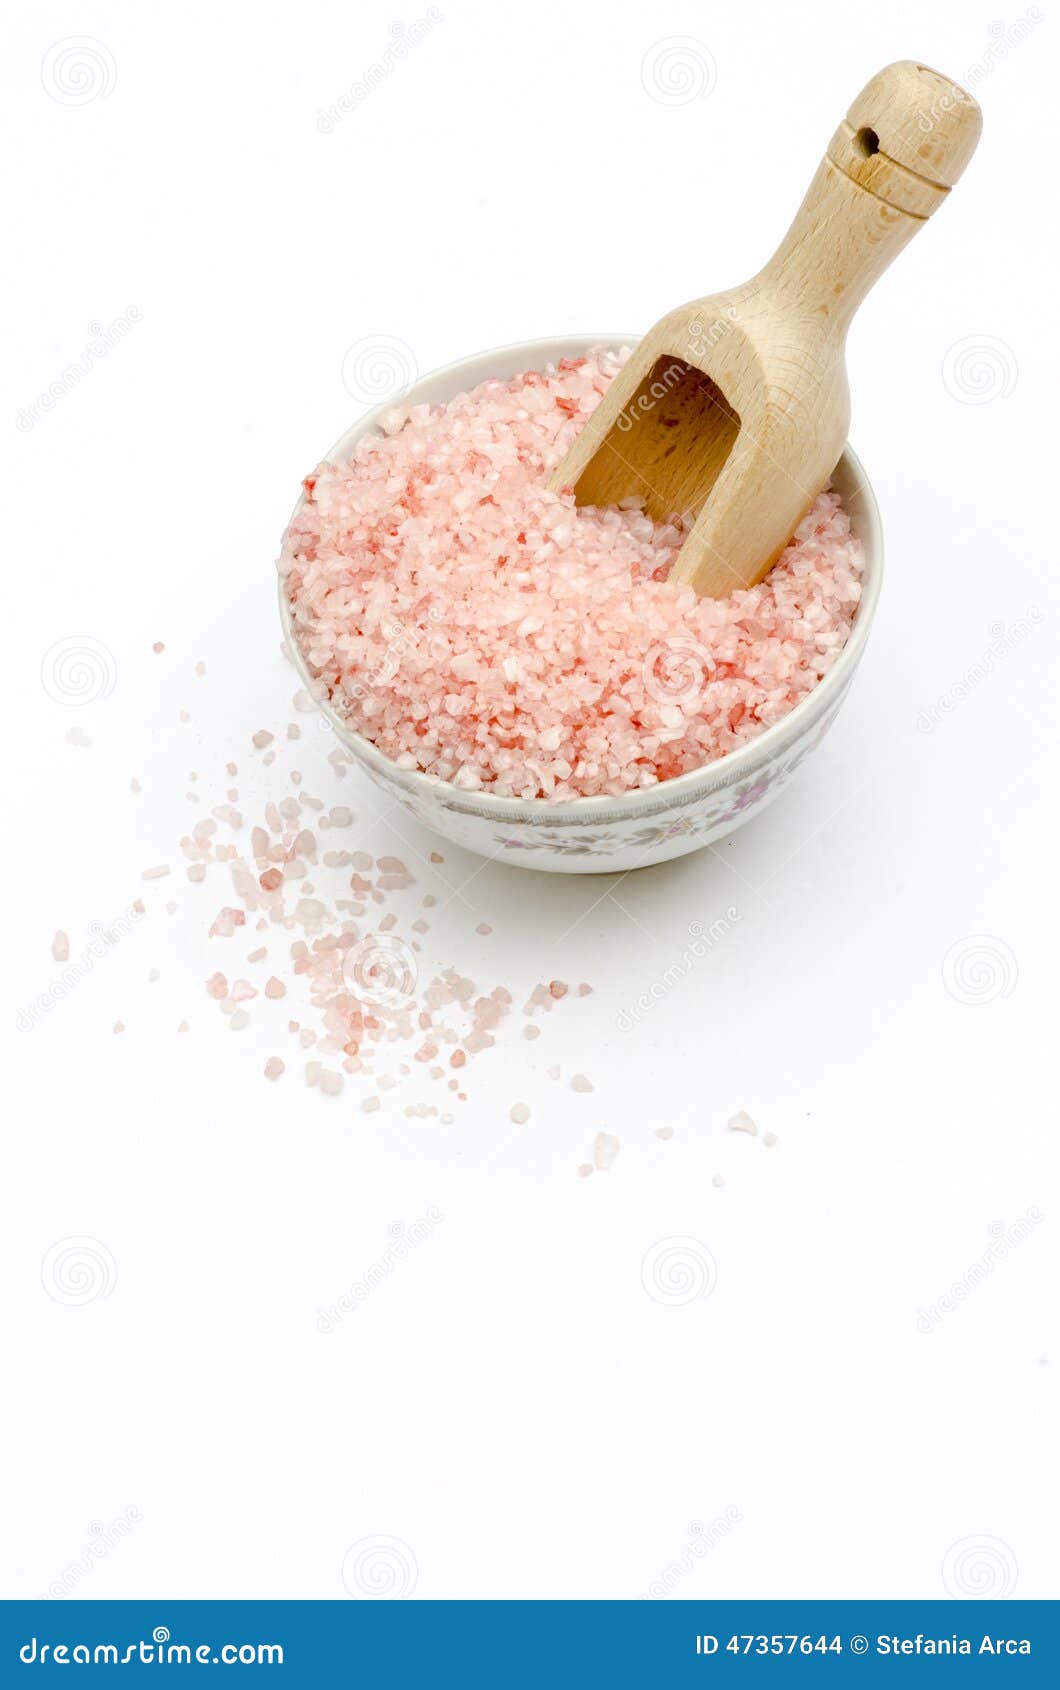 bowl full of pink bath salts, spoon, grains of salt fallen, on white background frontal view